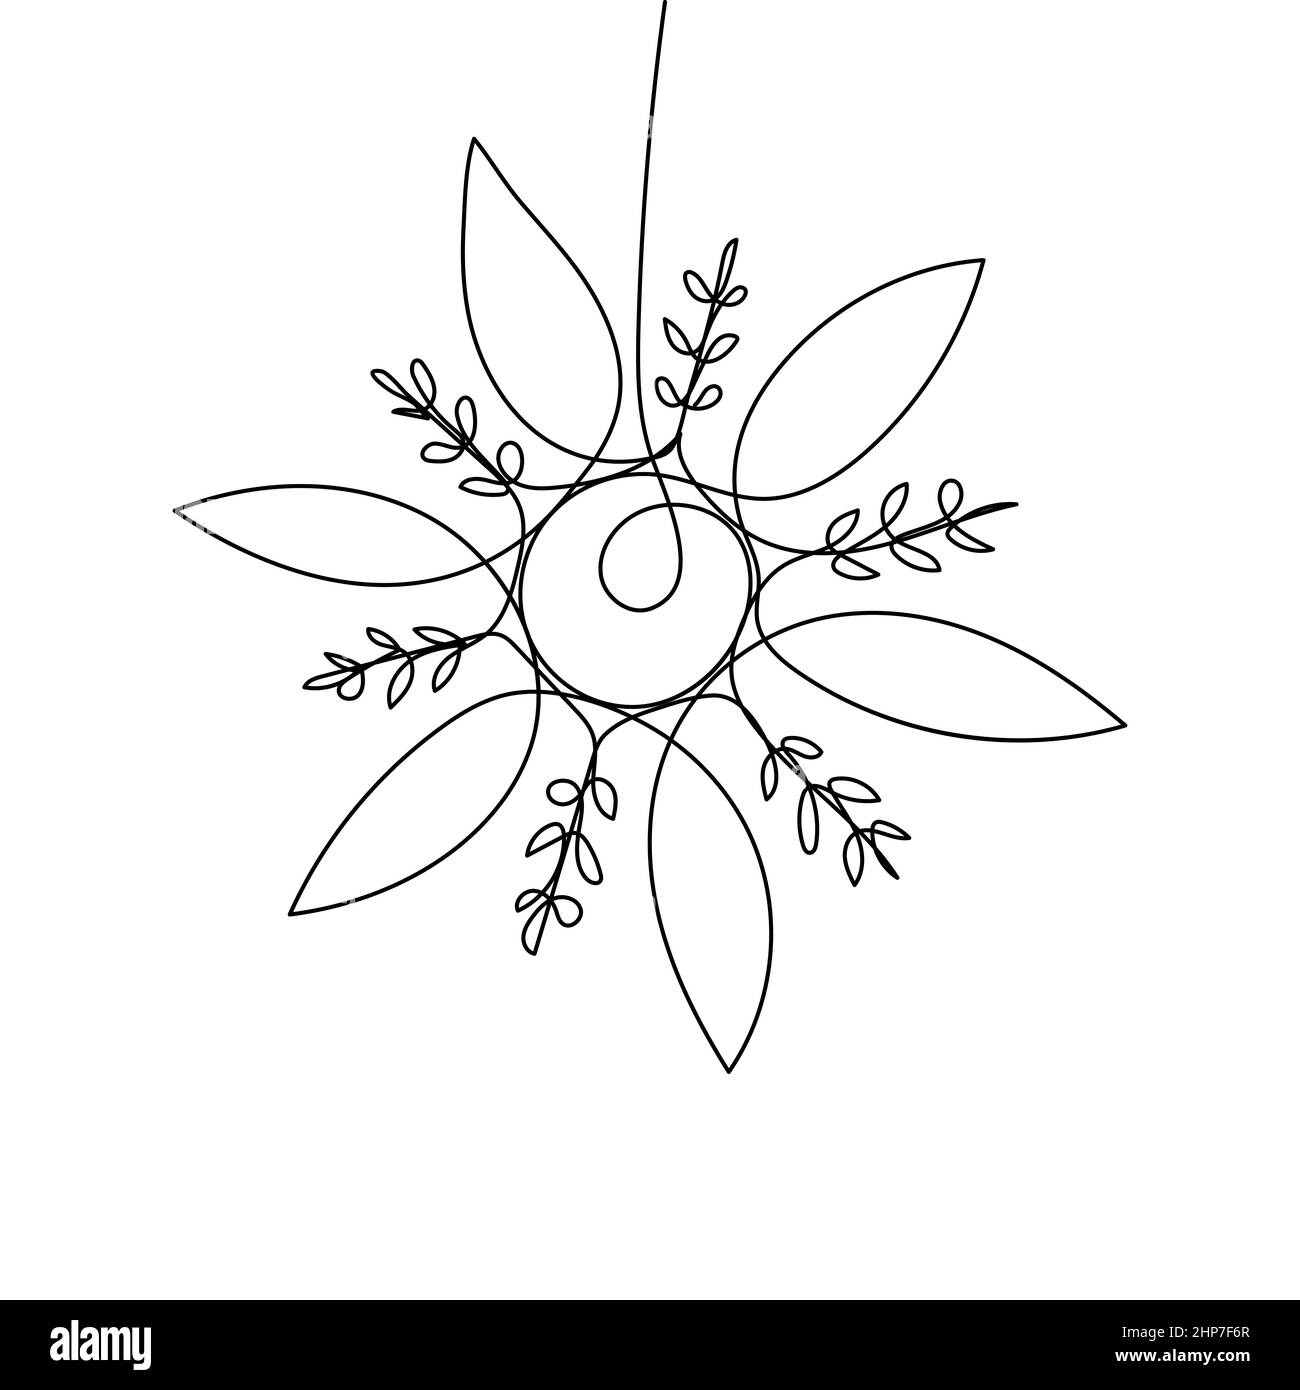 Continuous one-line drawing of a snowflake. New Years celebration concept isolated on white background. Vector sketch illustration Stock Vector